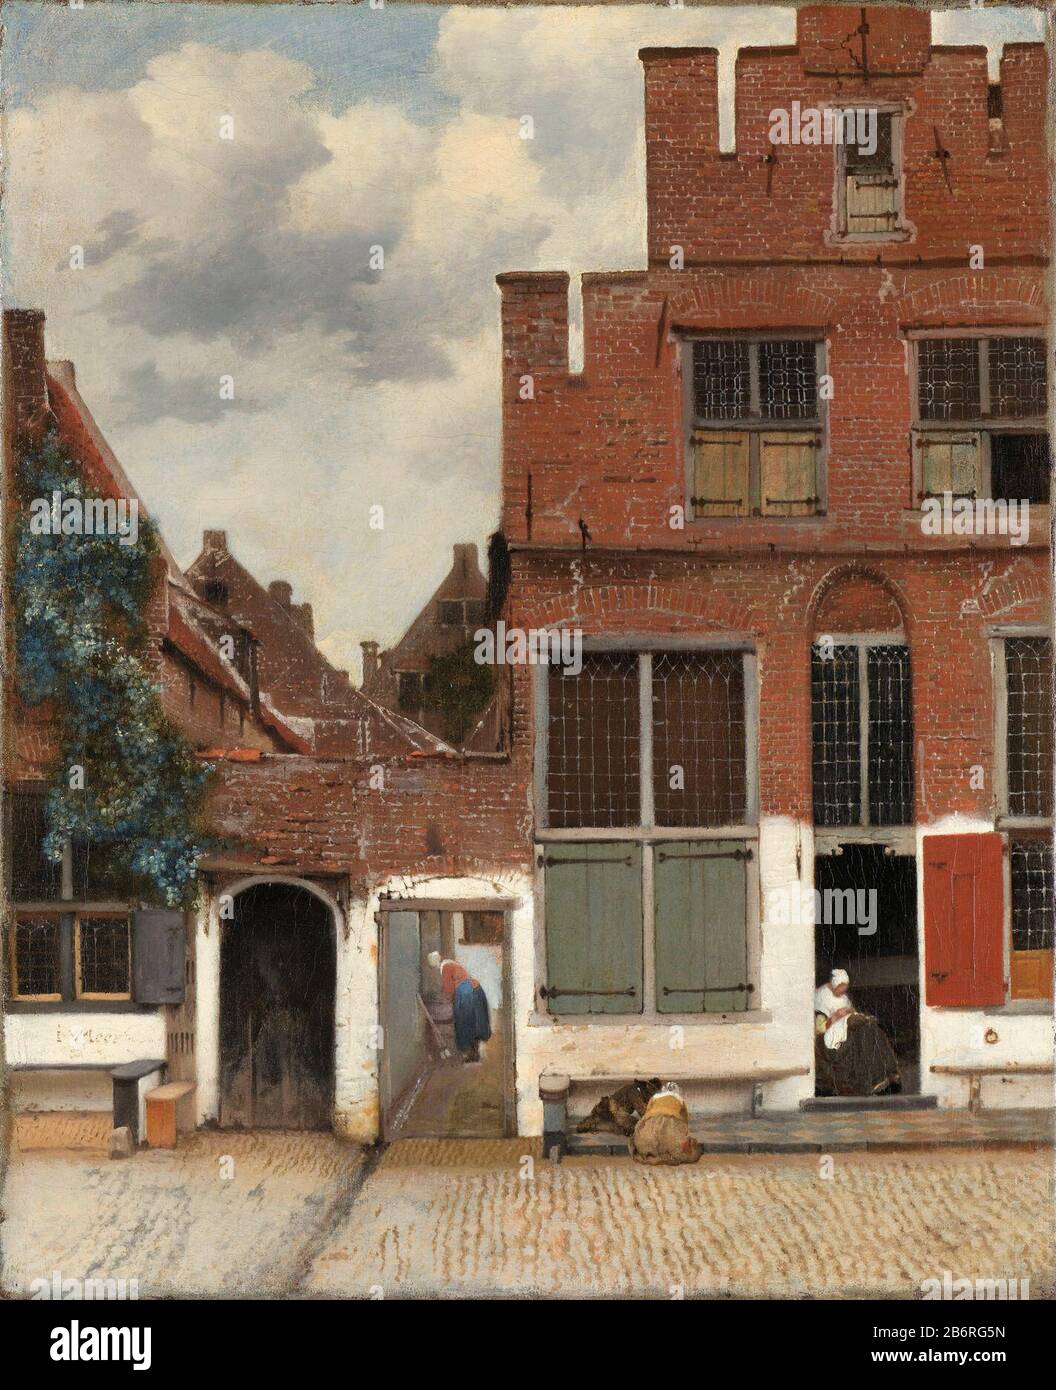 View of houses in Delft, known as 'the street'. The facades of several houses on a street in Delft. Between the houses an alley where a woman is bent over a washtub. In the open door of the house on the right is a woman needlework, left the house on the sidewalk two playing kinderen. Manufacturer : painter Johannes Vermeer Dating: ca. 1658 Physical characteristics: oil on canvas material: canvas oil painting Dimensions: canvas size: h 54 3 cm. B × 44 cm. D × 9 cm.  Subject: street civic architecture; edifices; dwellingschildren's games and plays (+ out of doors (sports, games, etc).) home sewi Stock Photo